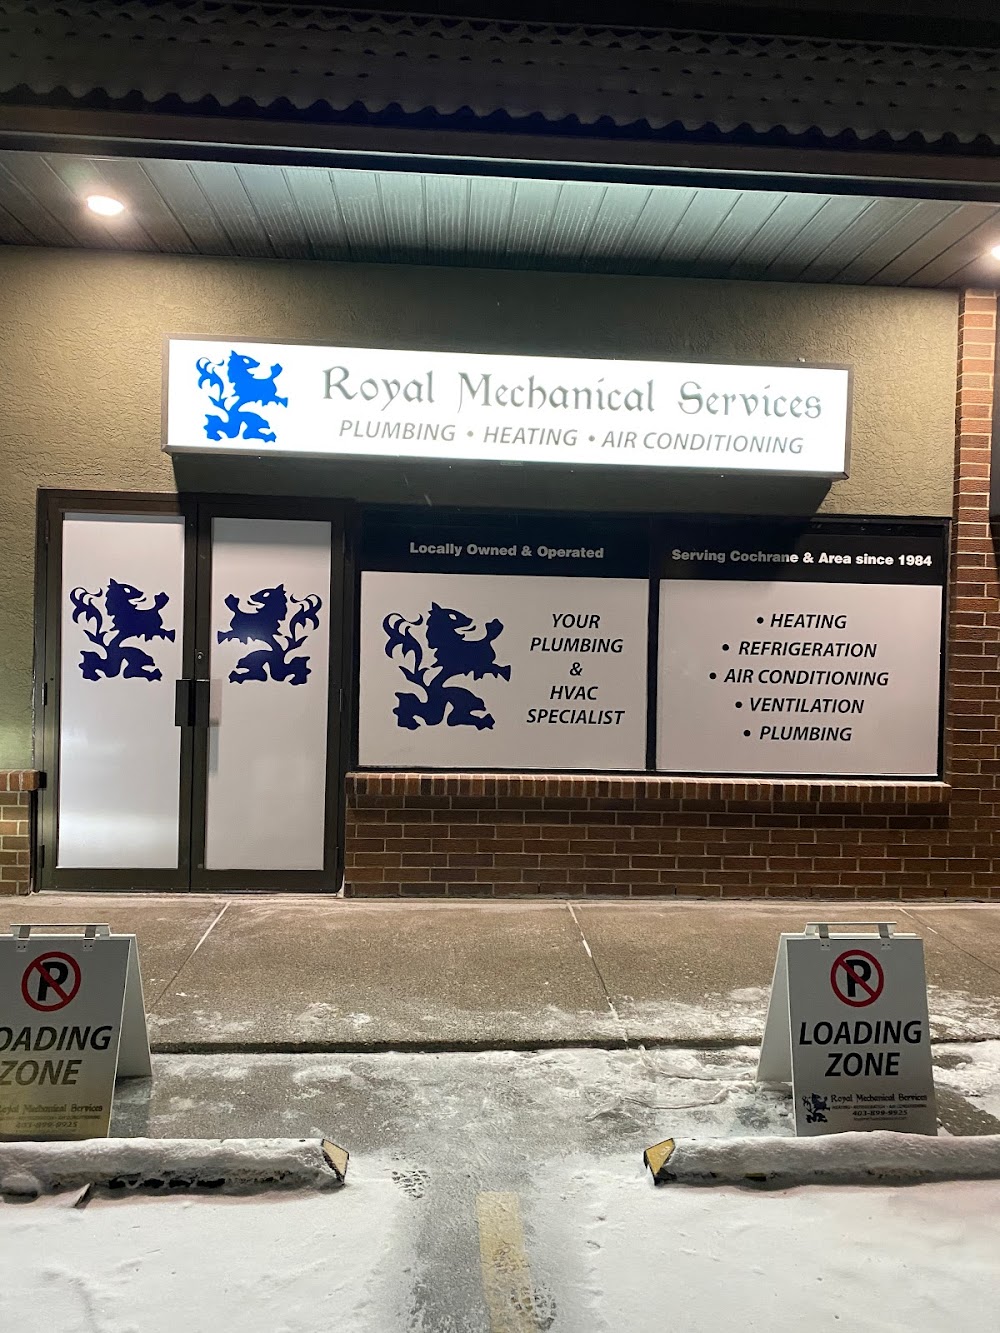 Royal Mechanical Services